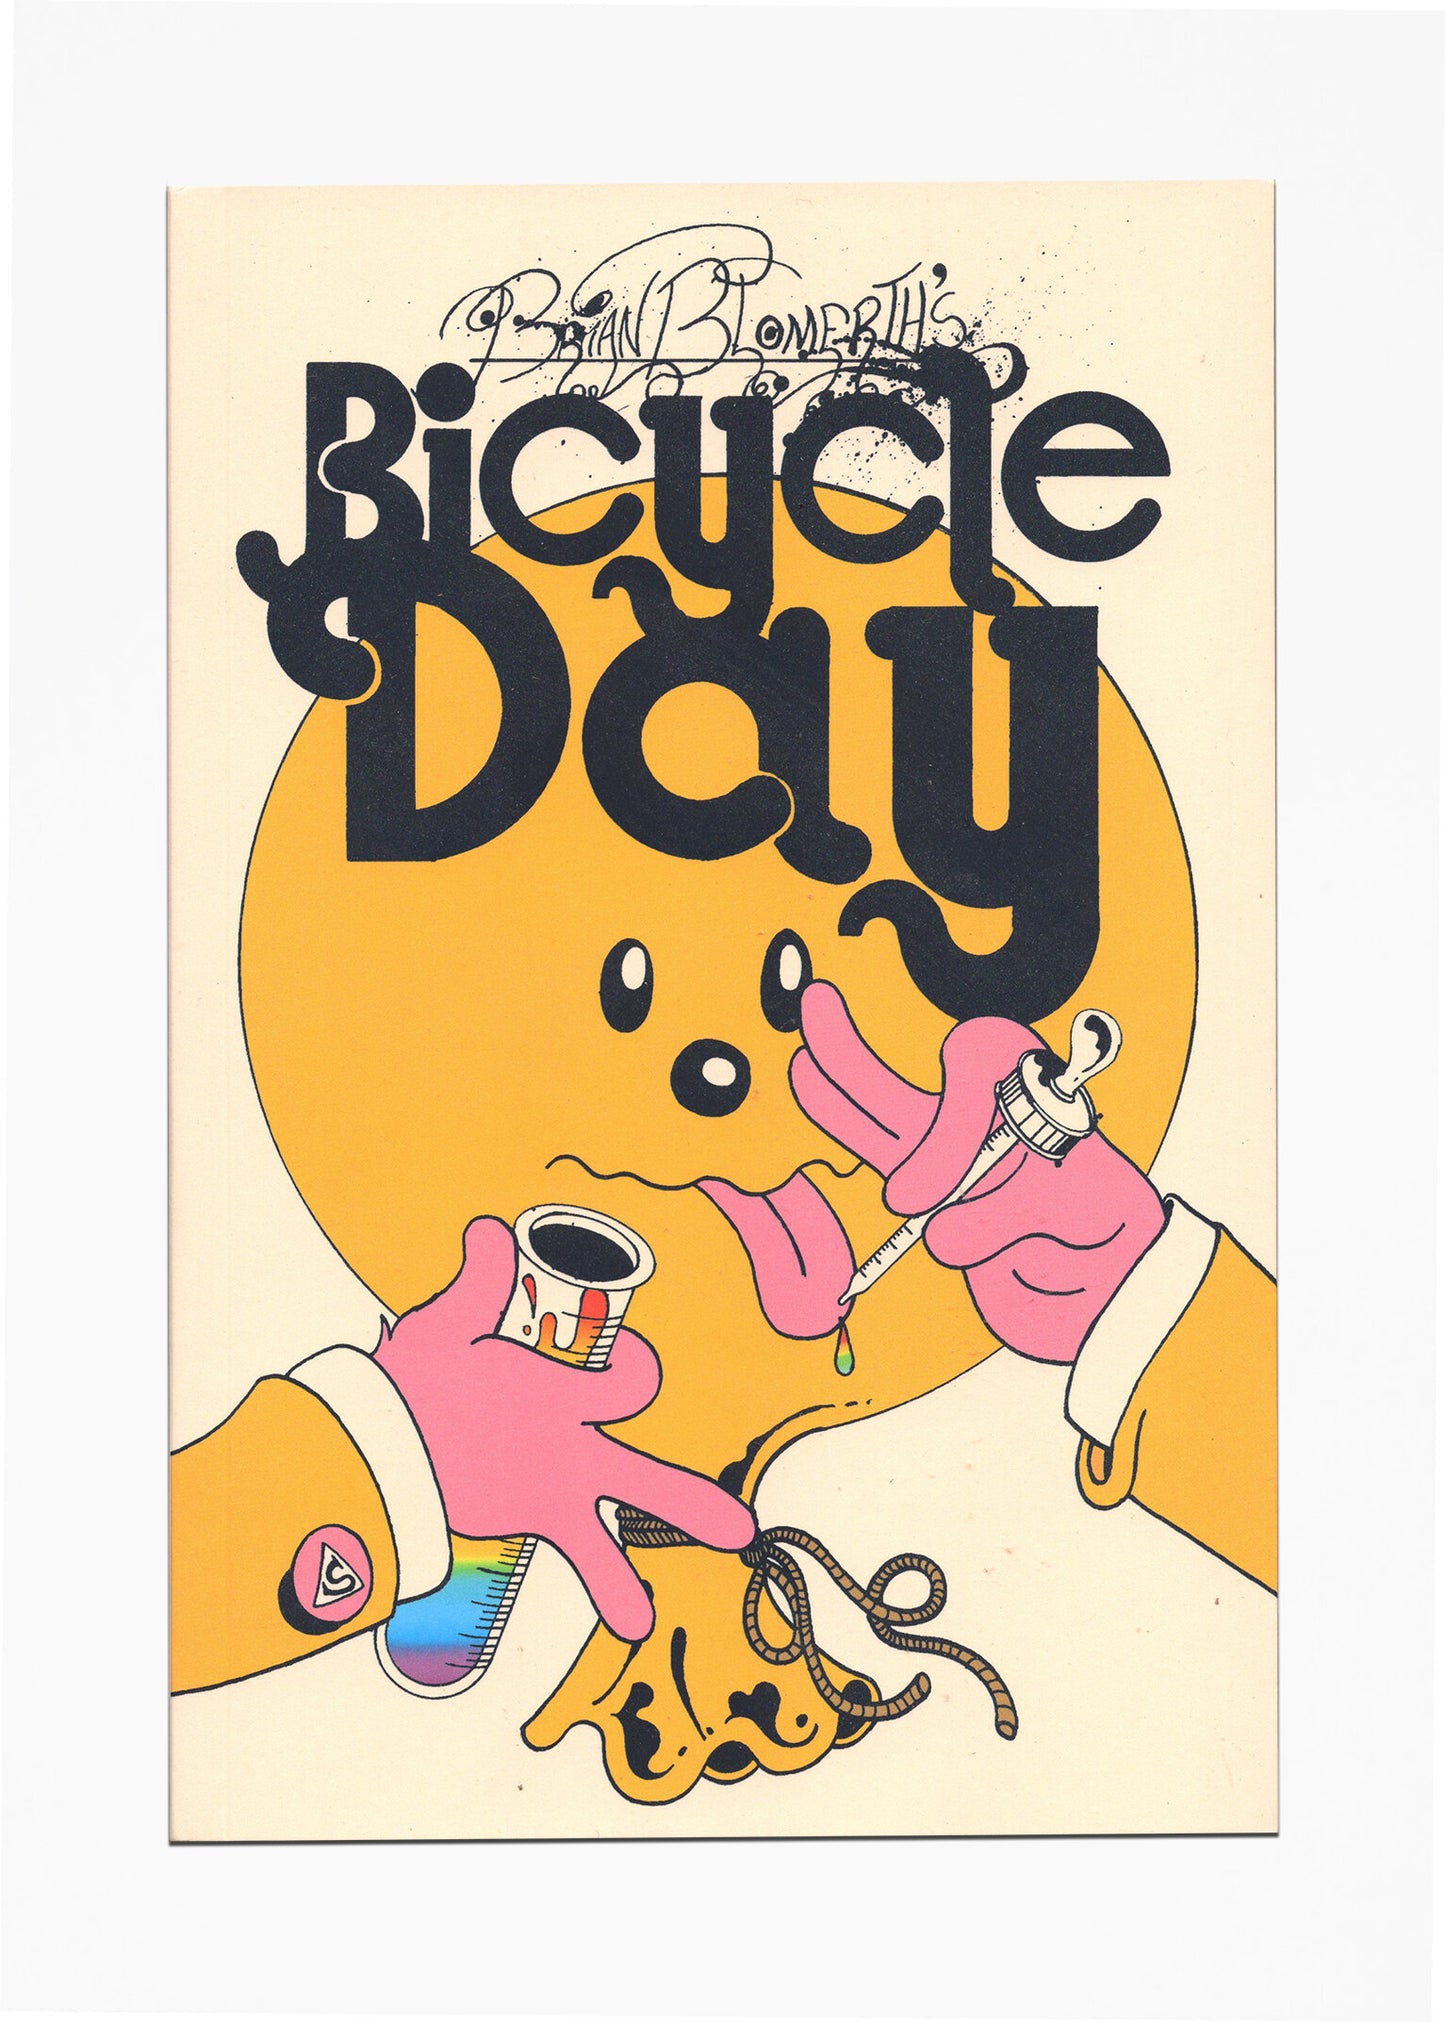 Brian Blomerth's Bicycle Day